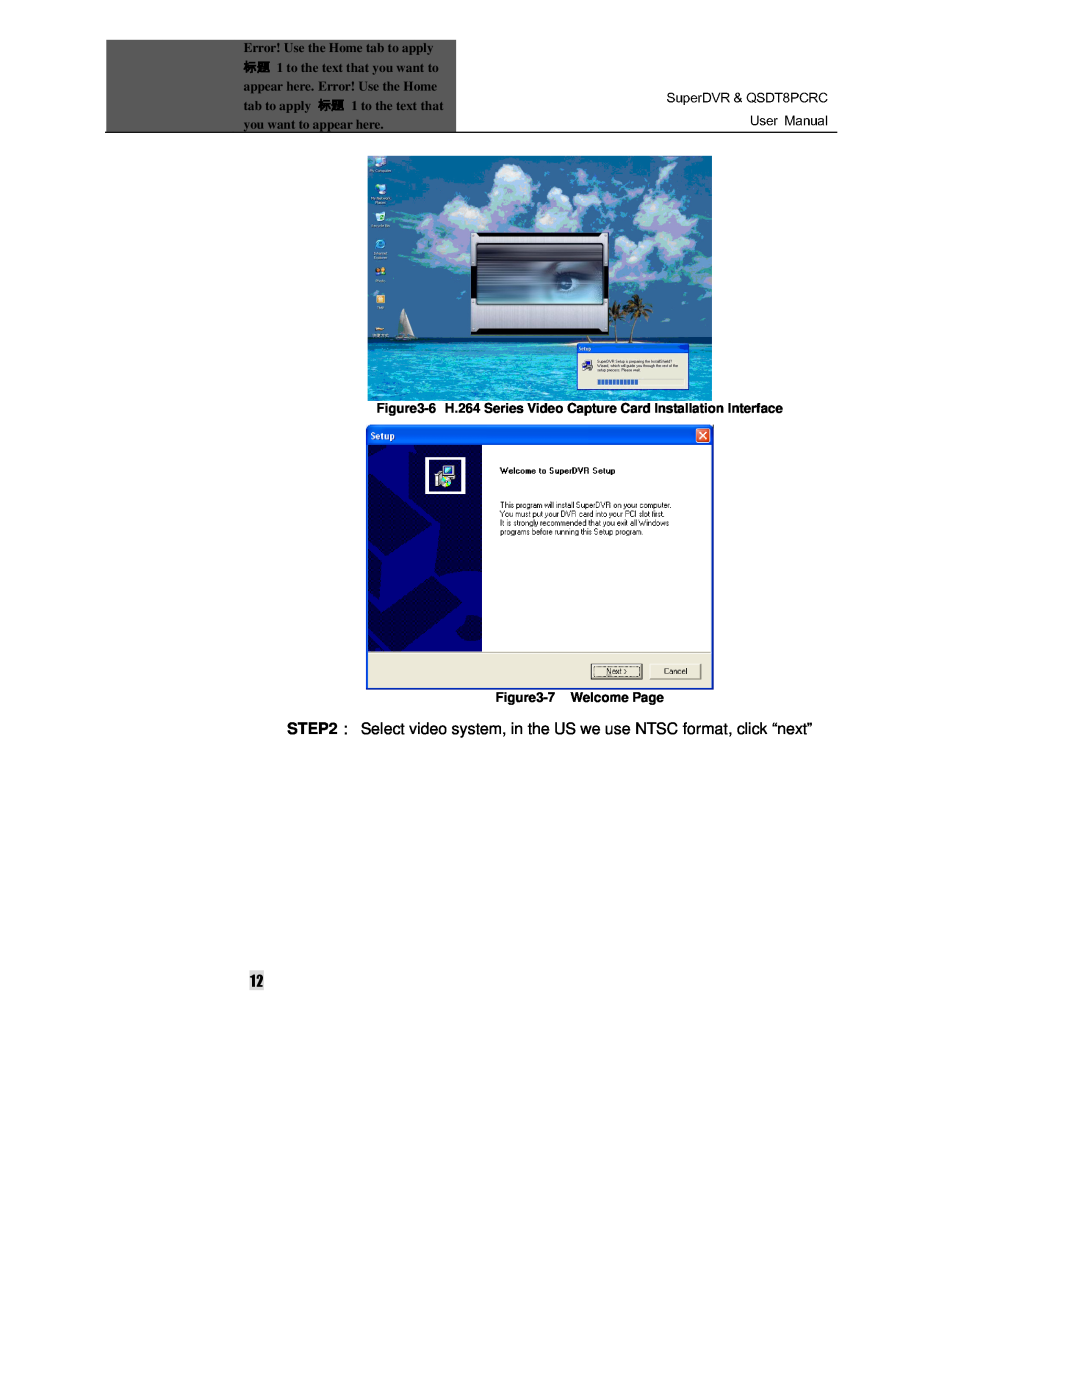 Q-See SuperDVR & QSDT8PCRC User Manual, Error! Use the Home tab to apply 1 to the text that you want to, 7 Welcome Page 